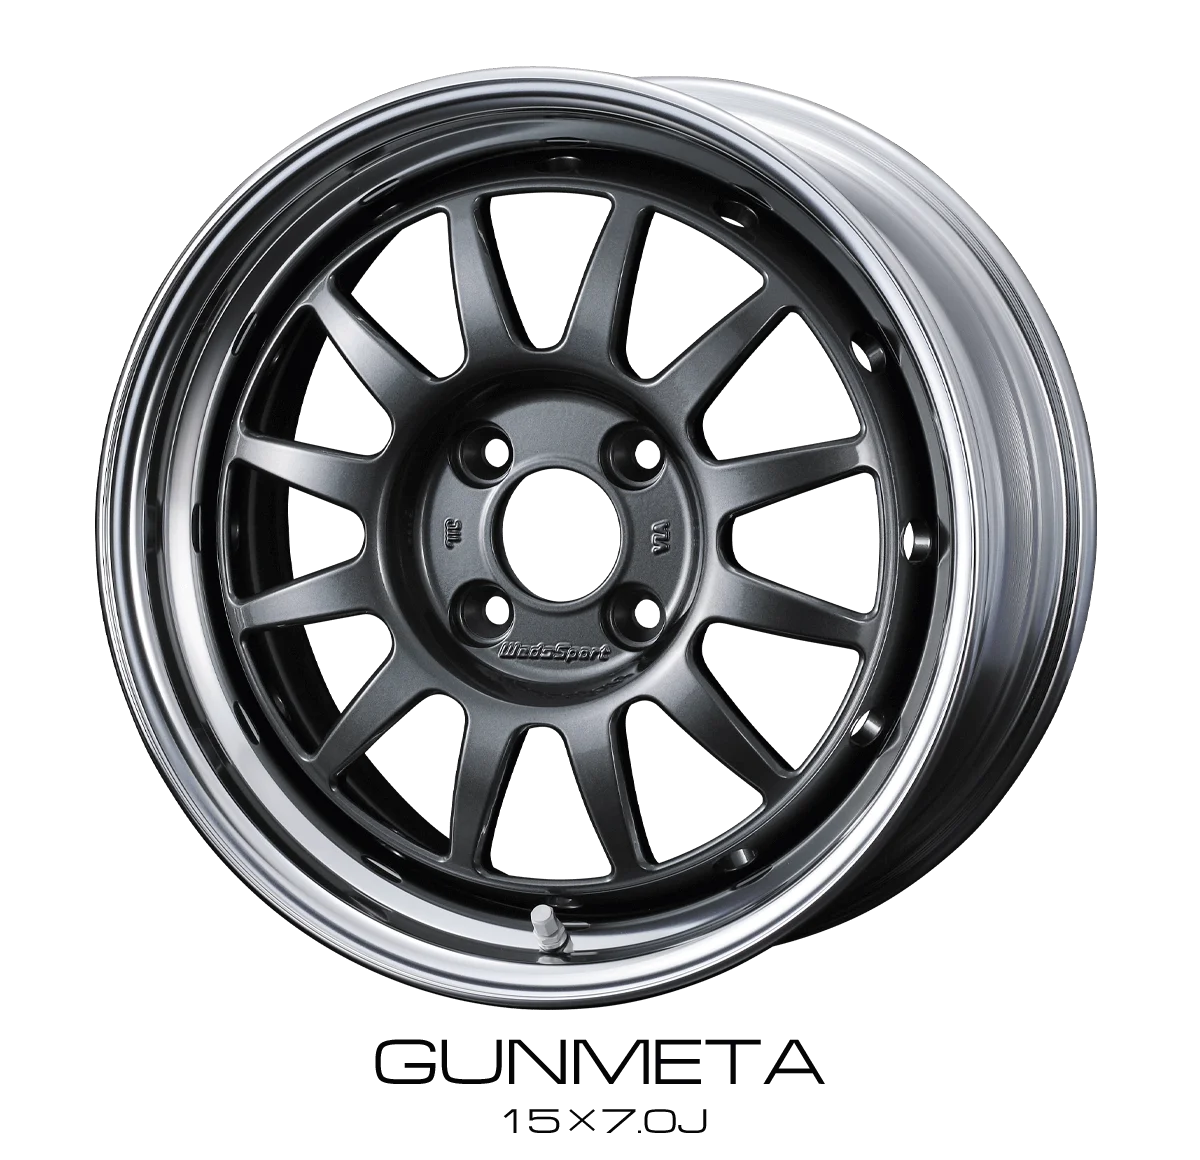 A black Weds Sport wheel on a white background.